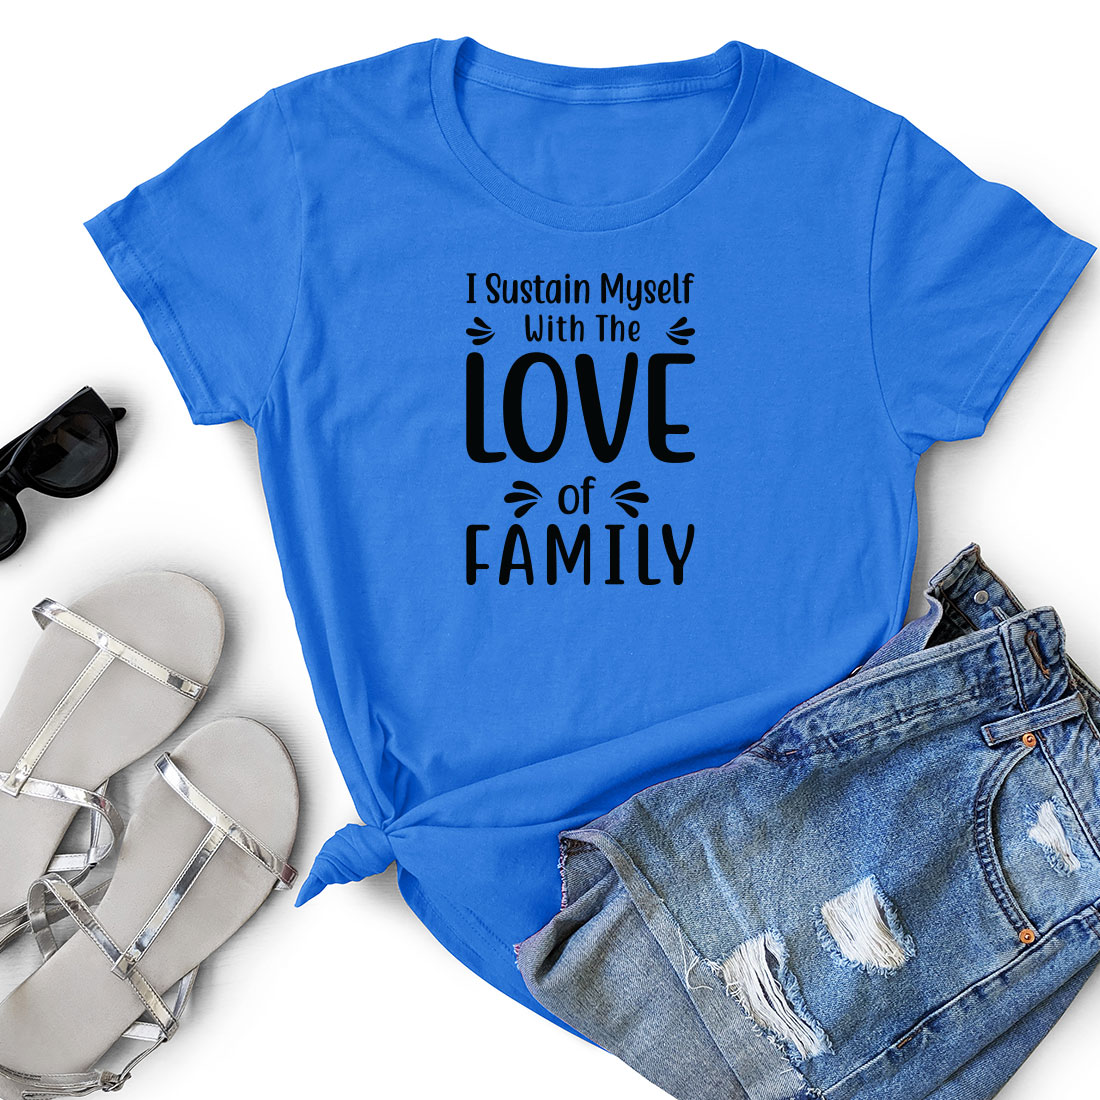 Blue t - shirt that says i susan mosel with the love of family.